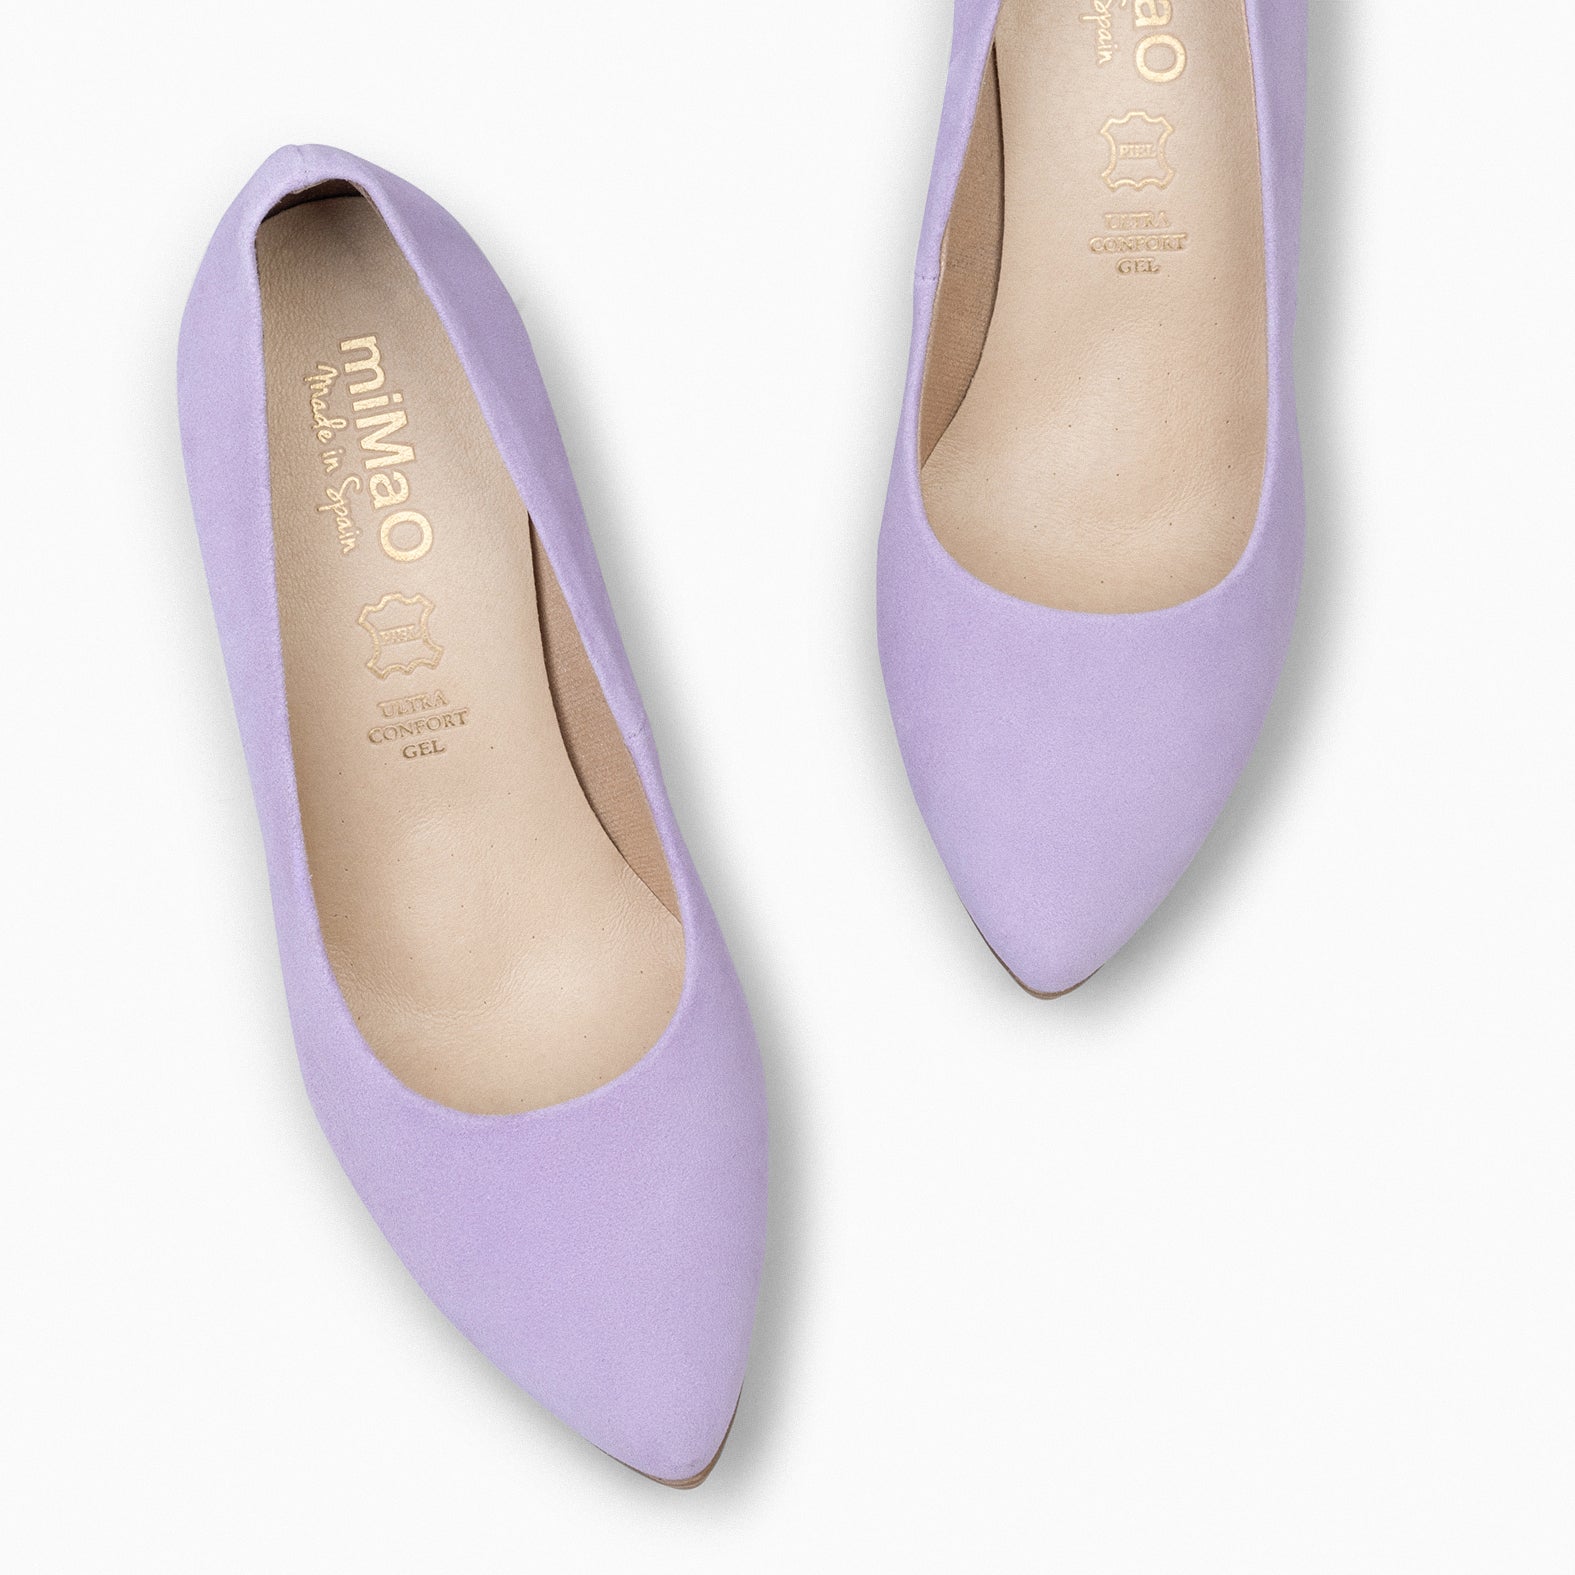 URBAN – LILAC Suede high-heeled shoes 